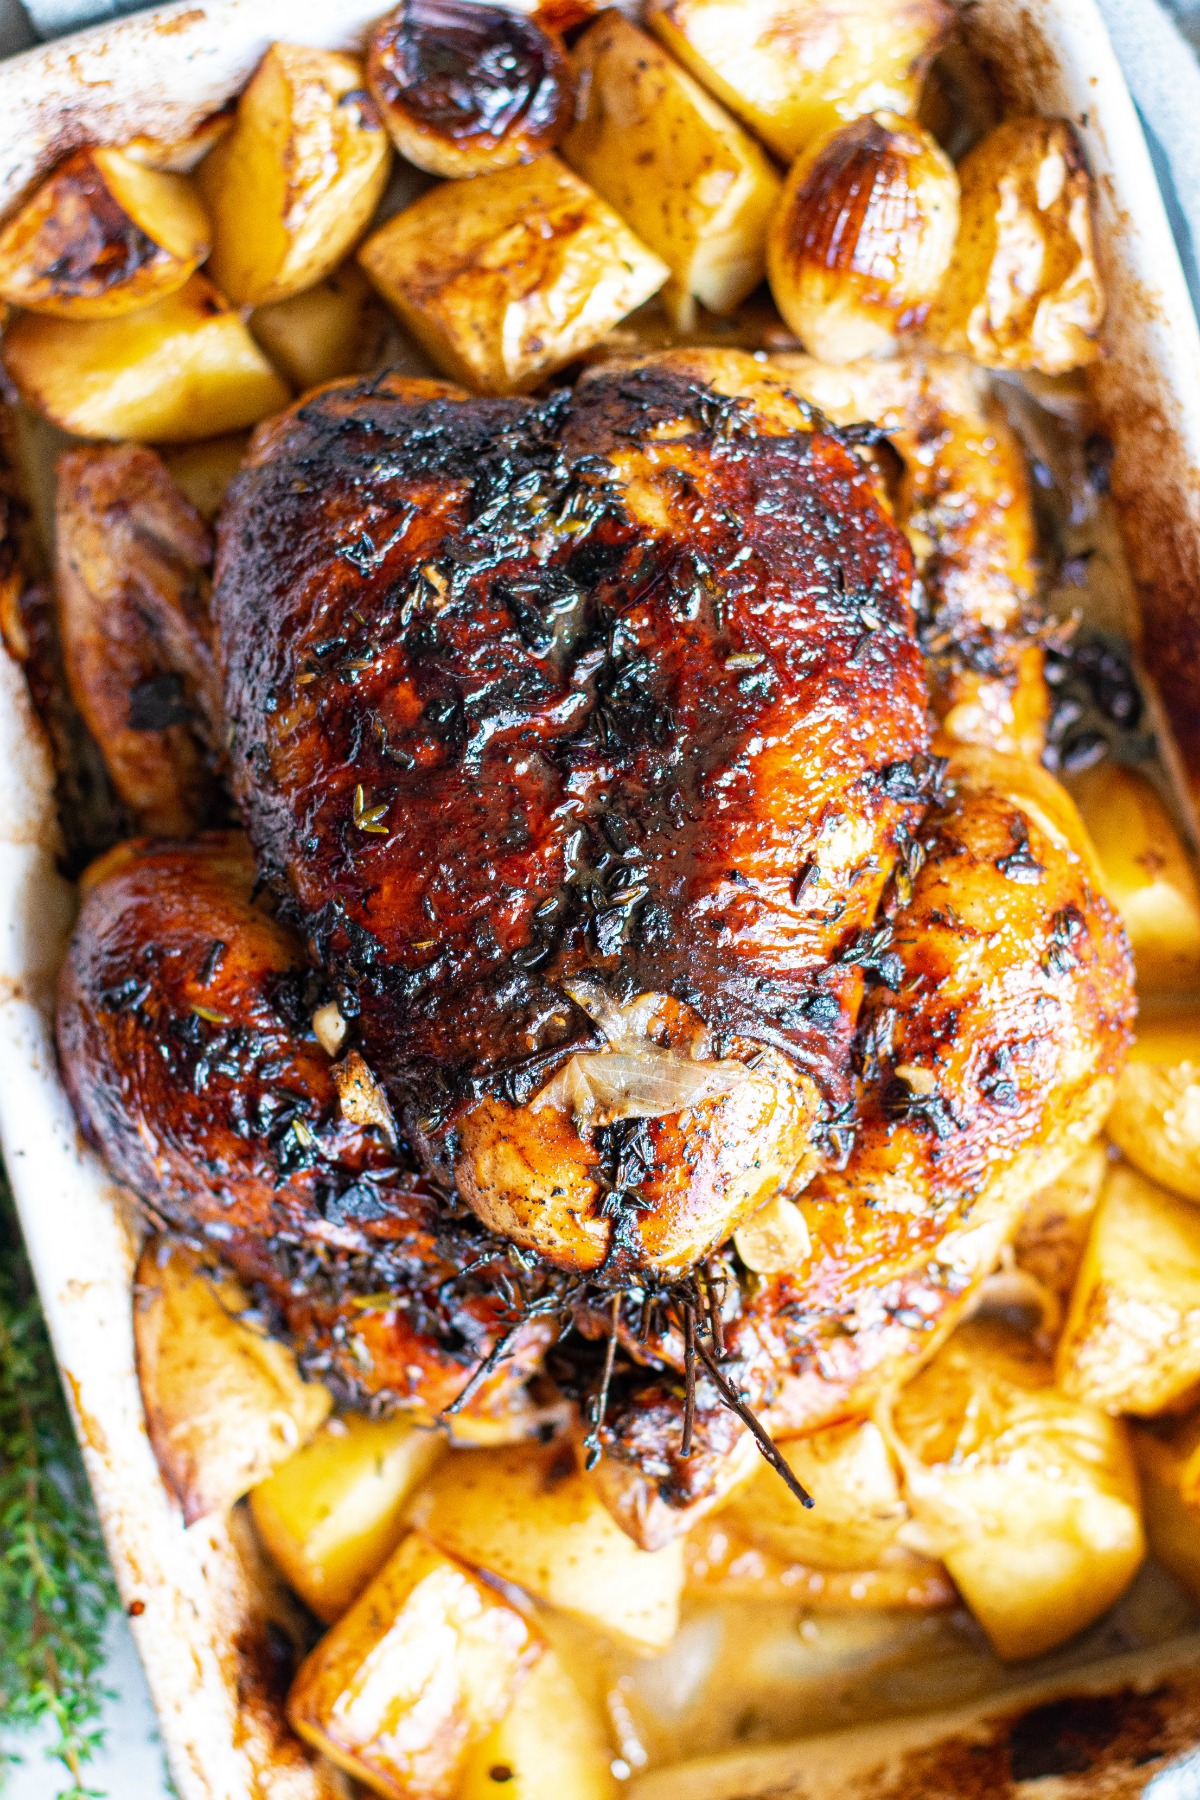 Whole roasted chicken with balsamic glaze in roasting pan.